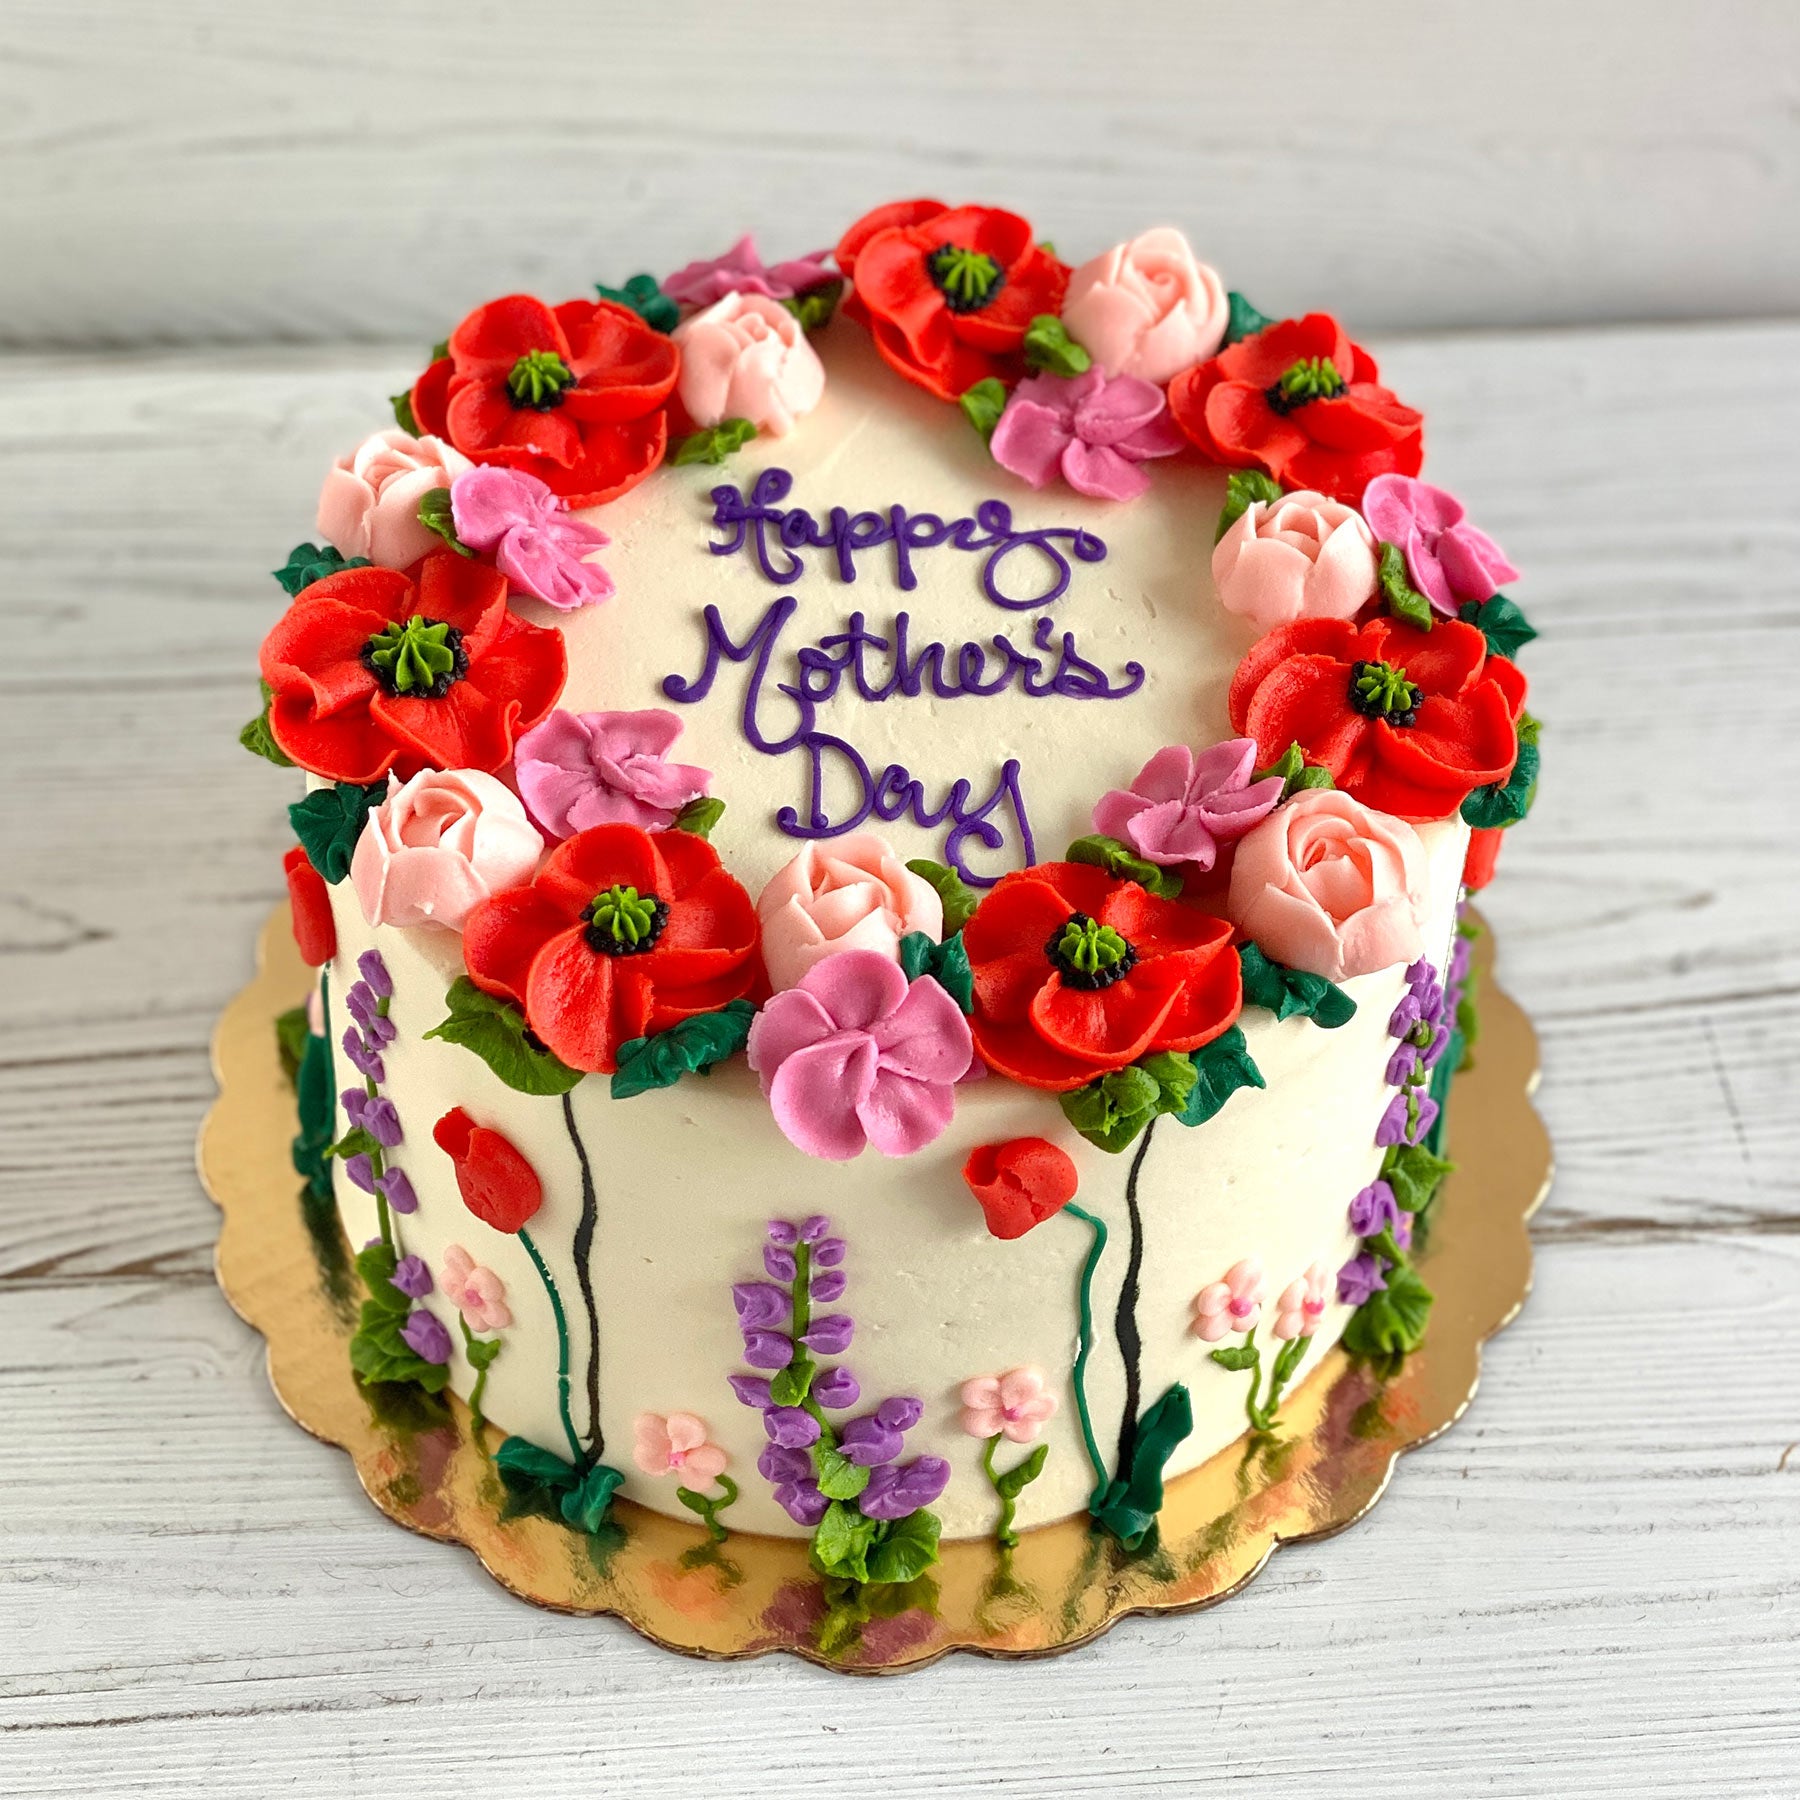 Mother's Day Cake 2021